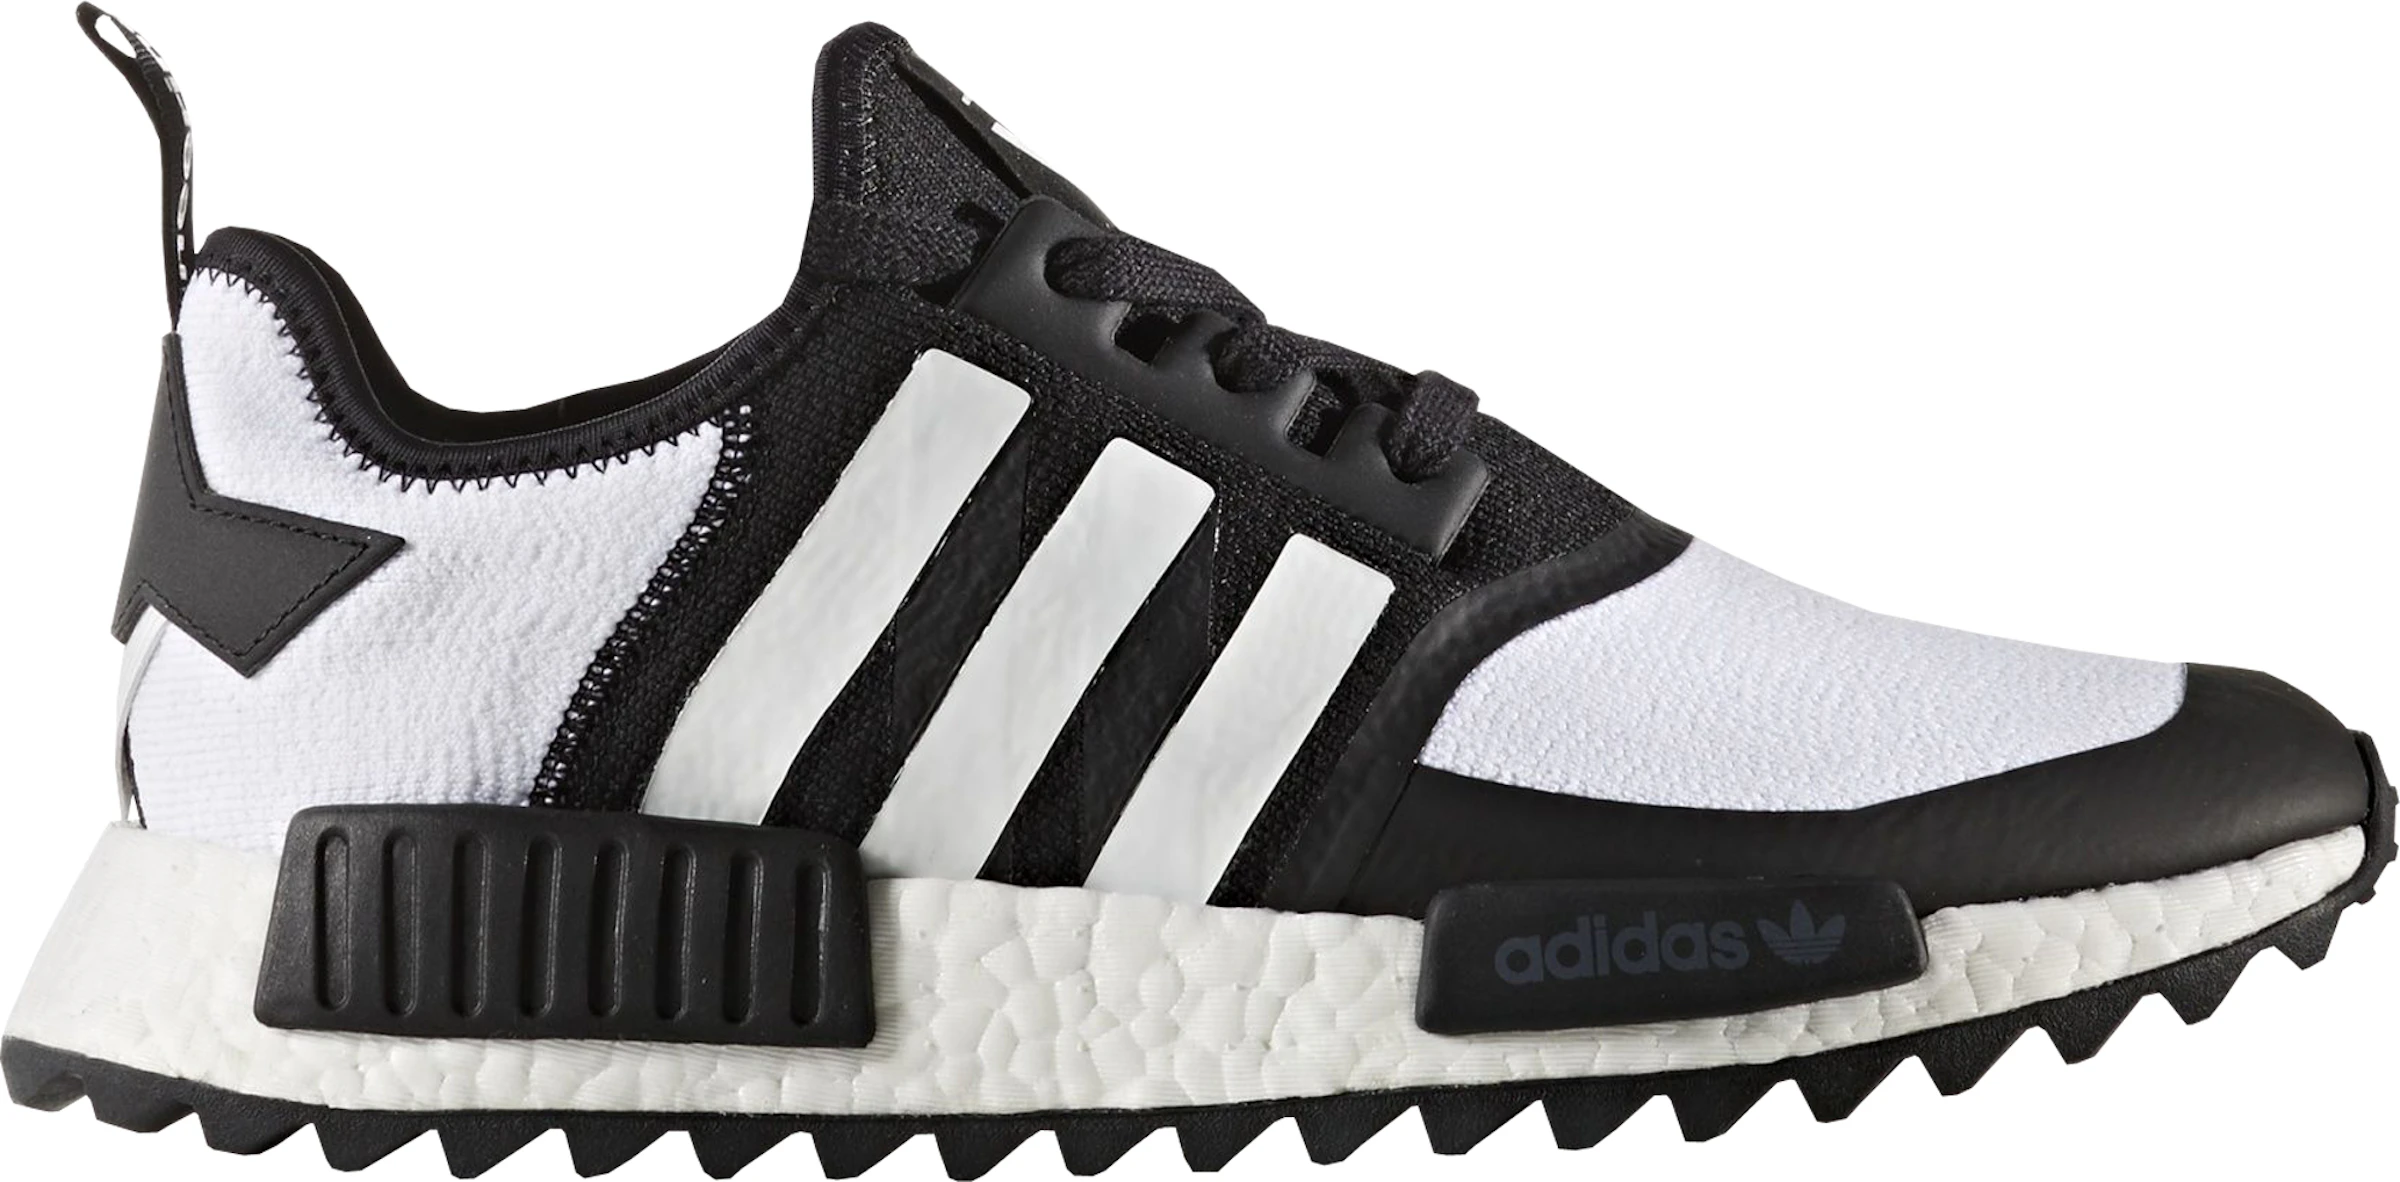 Barrio bajo encuentro conductor adidas NMD R1 Trail White Mountaineering Black White - CG3646 - US